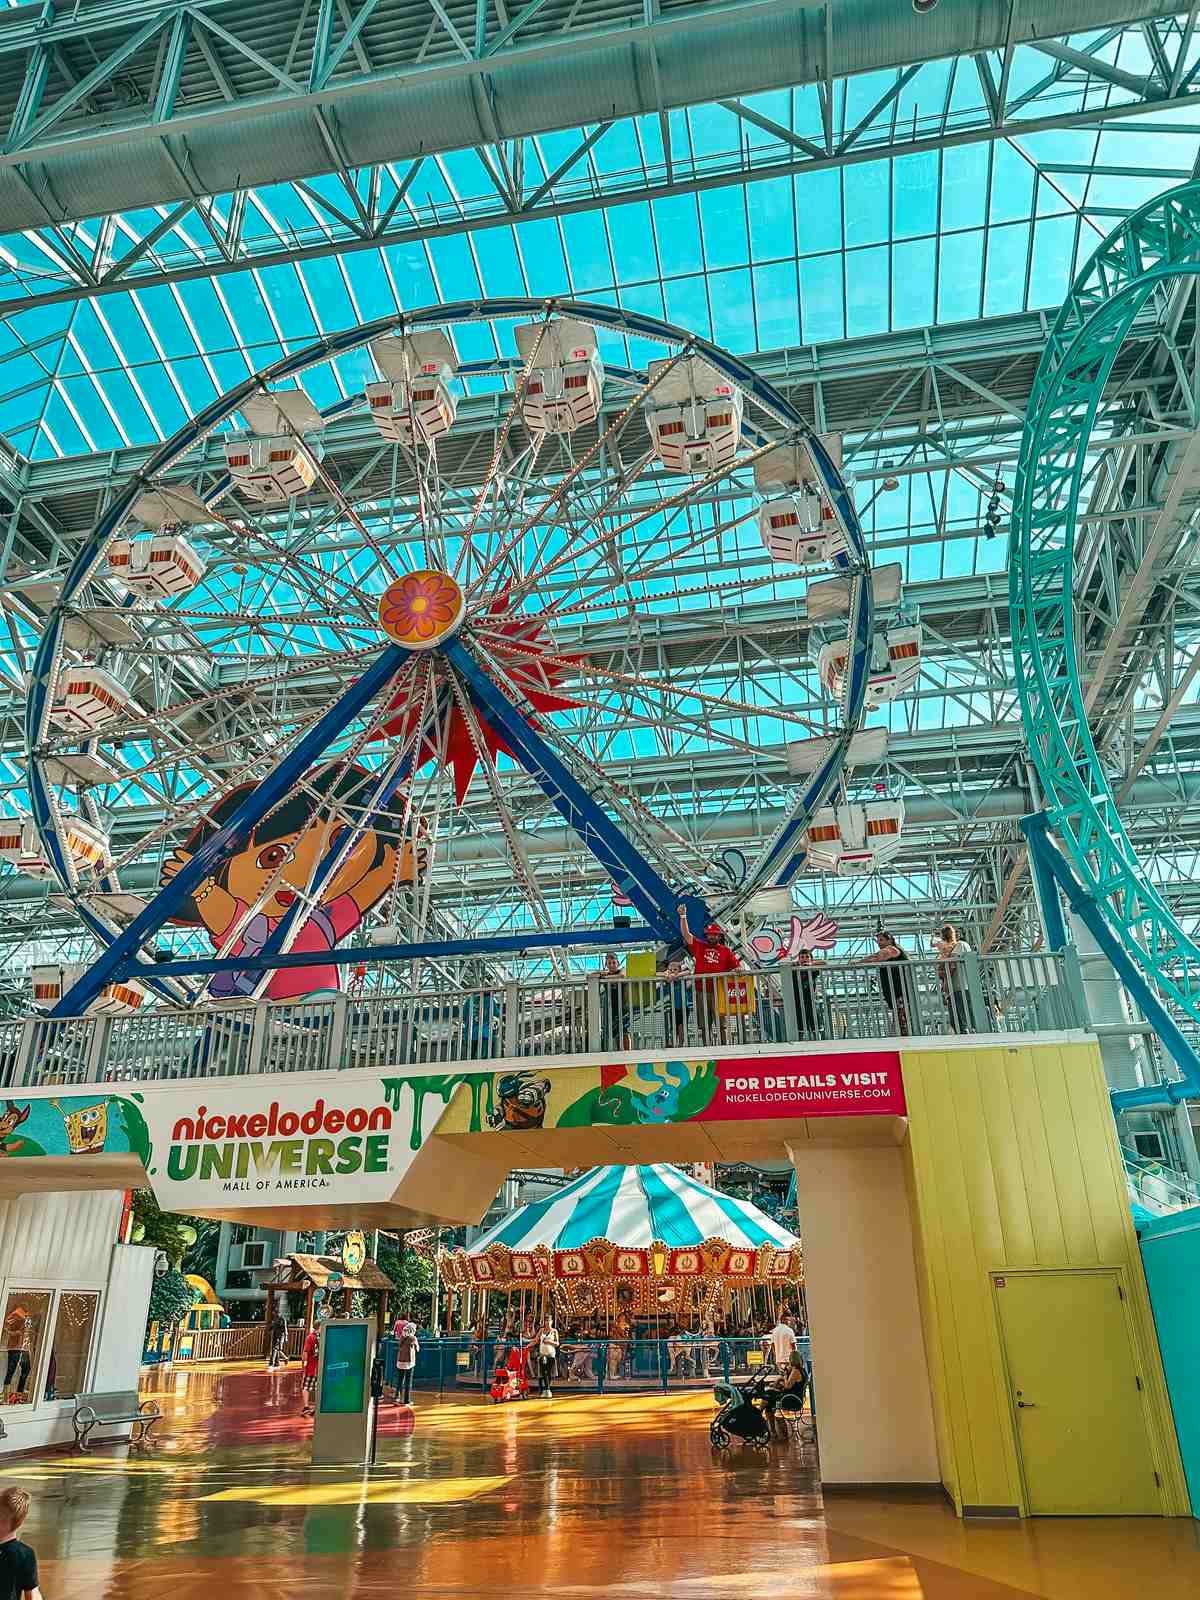 Nickelodean Universe at Mall of America